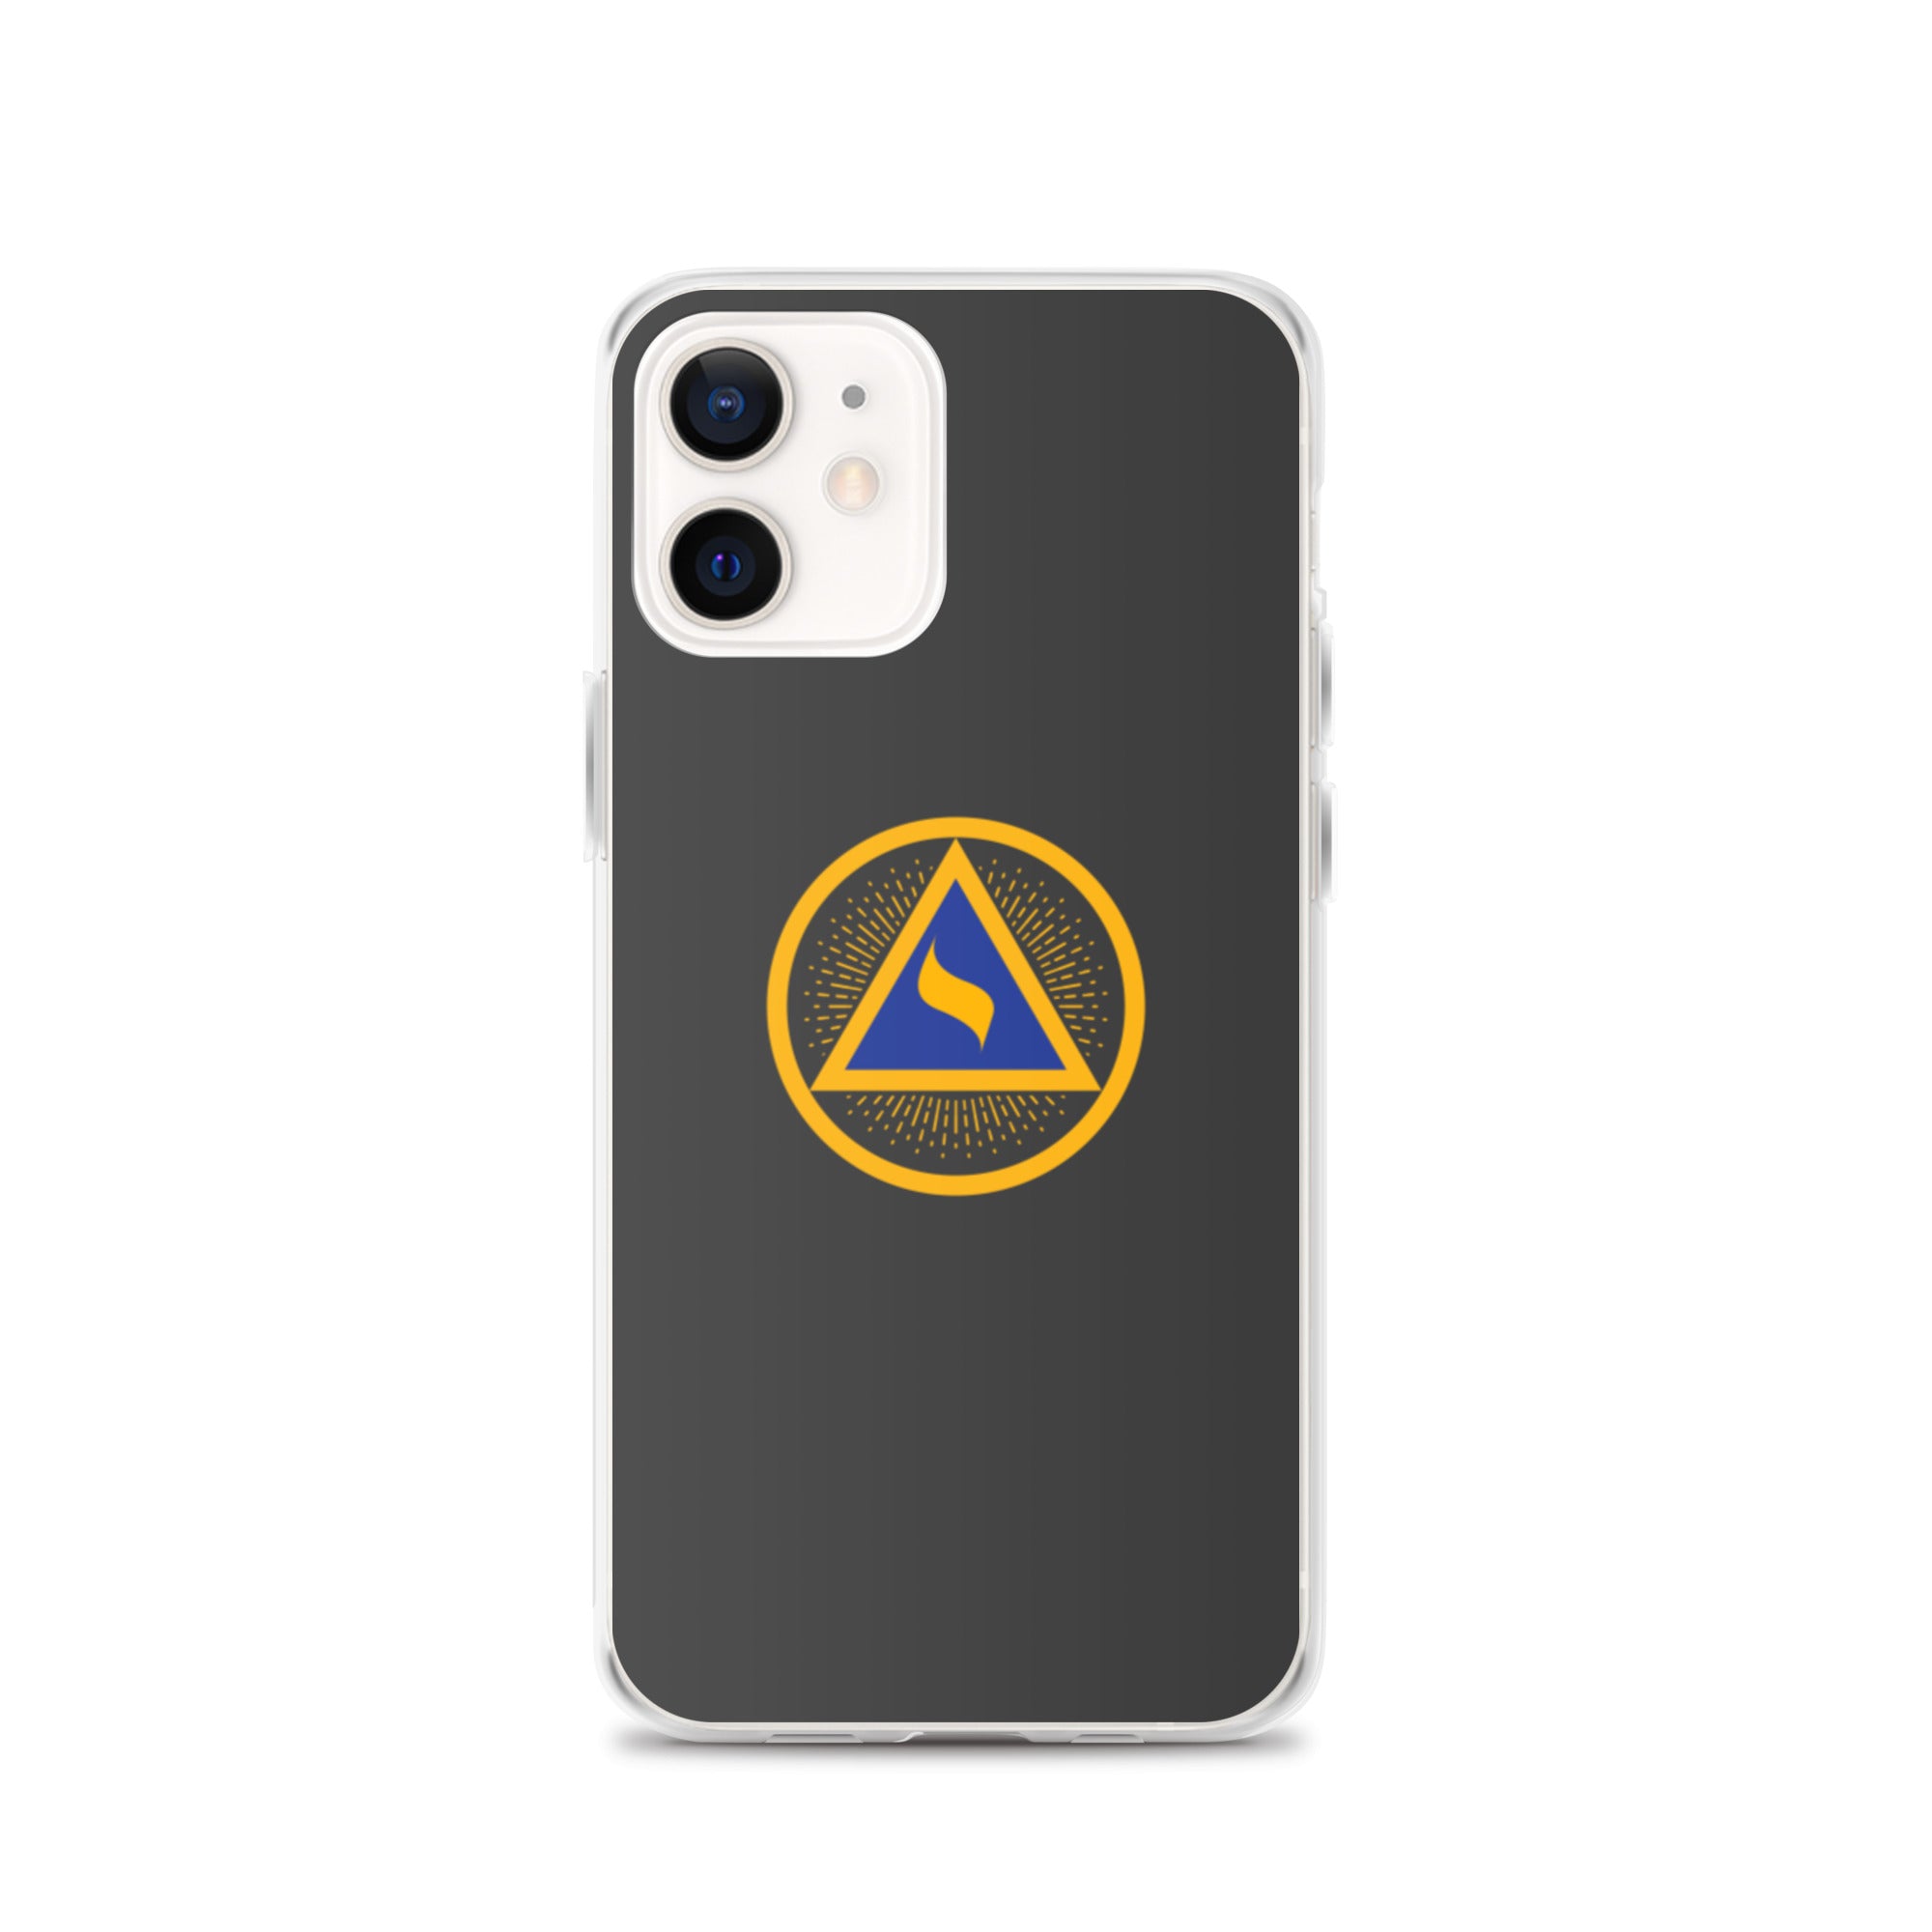 Lodge of Perfection No. 1 iPhone Case